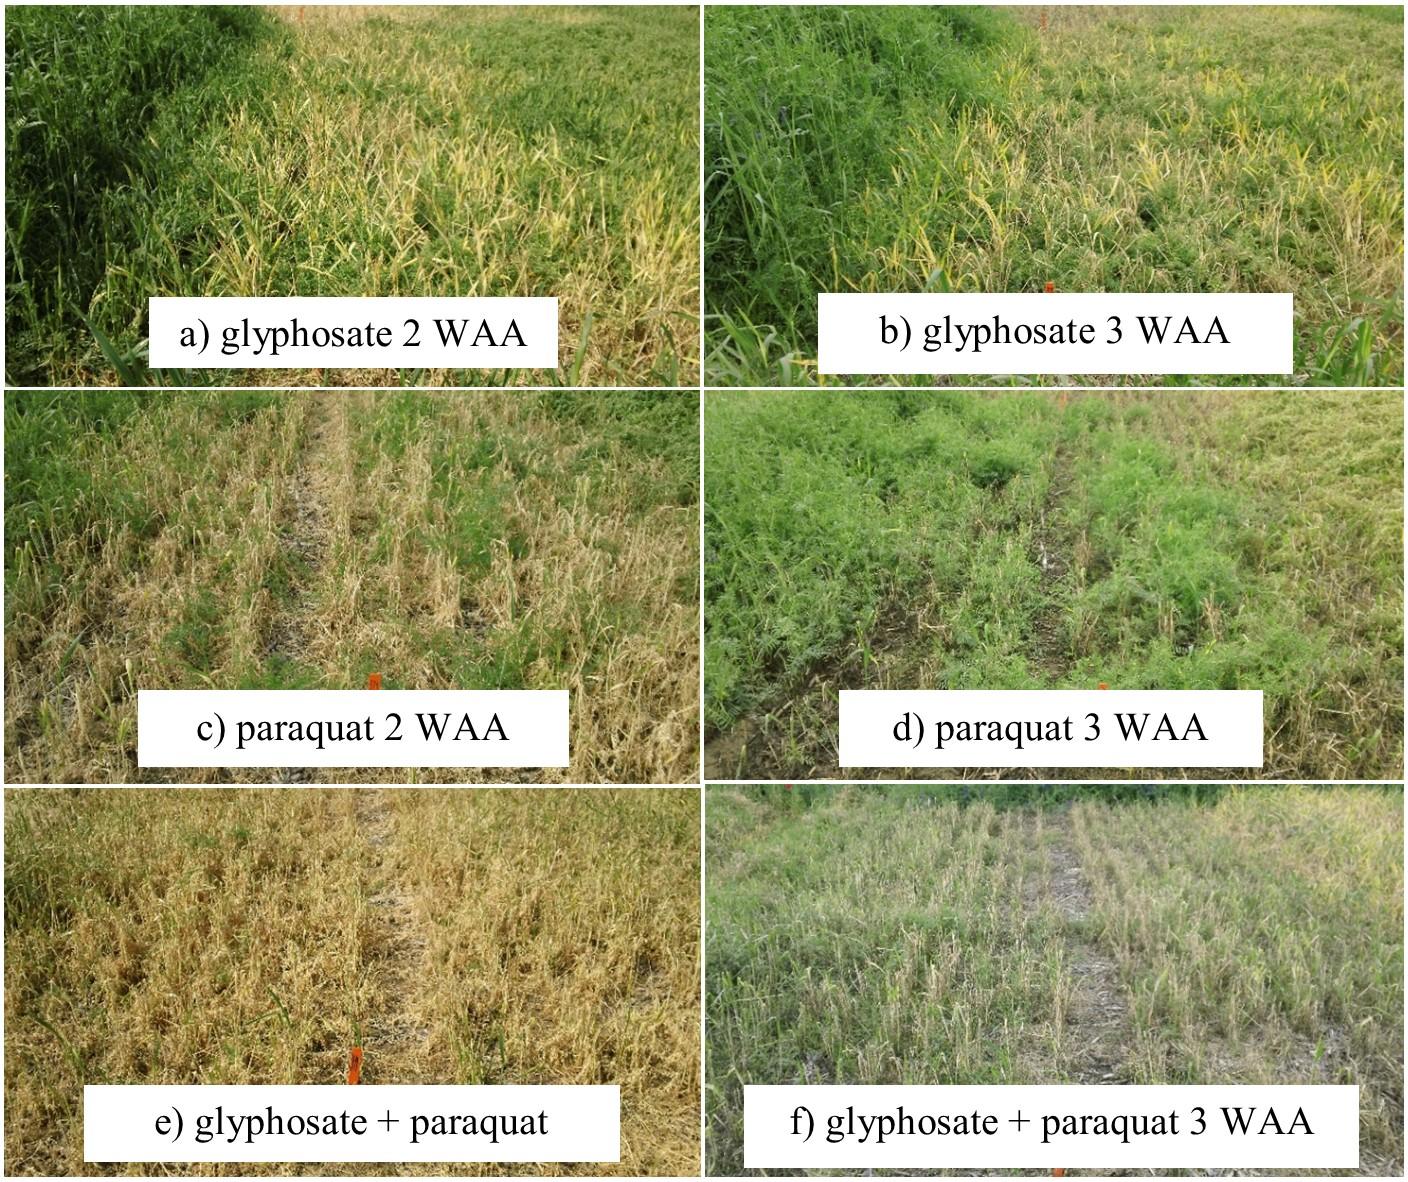 Differences in herbicide efficacy for managing a rye/vetch cover crop 2 and 3 weeks after application.